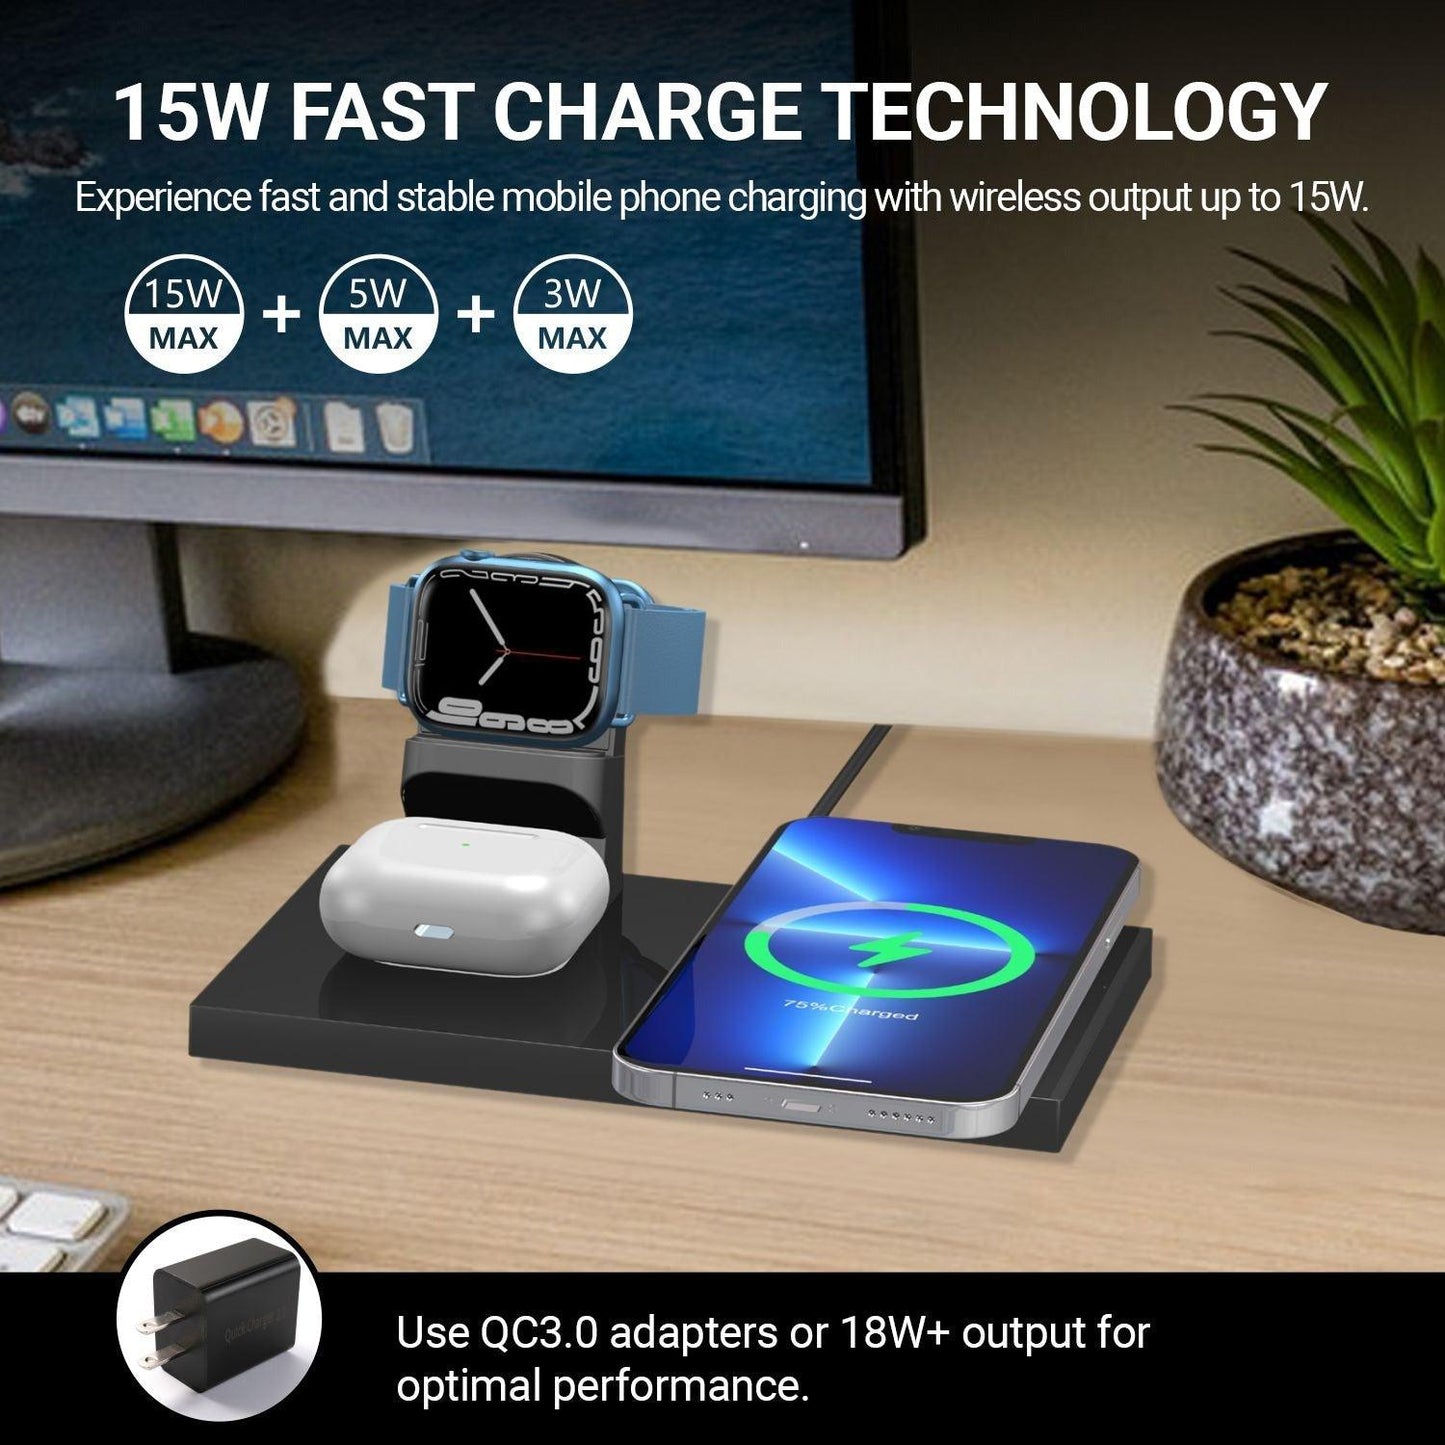 Crinis 3-in-1 Wireless Charging Station - Astra Cases SG